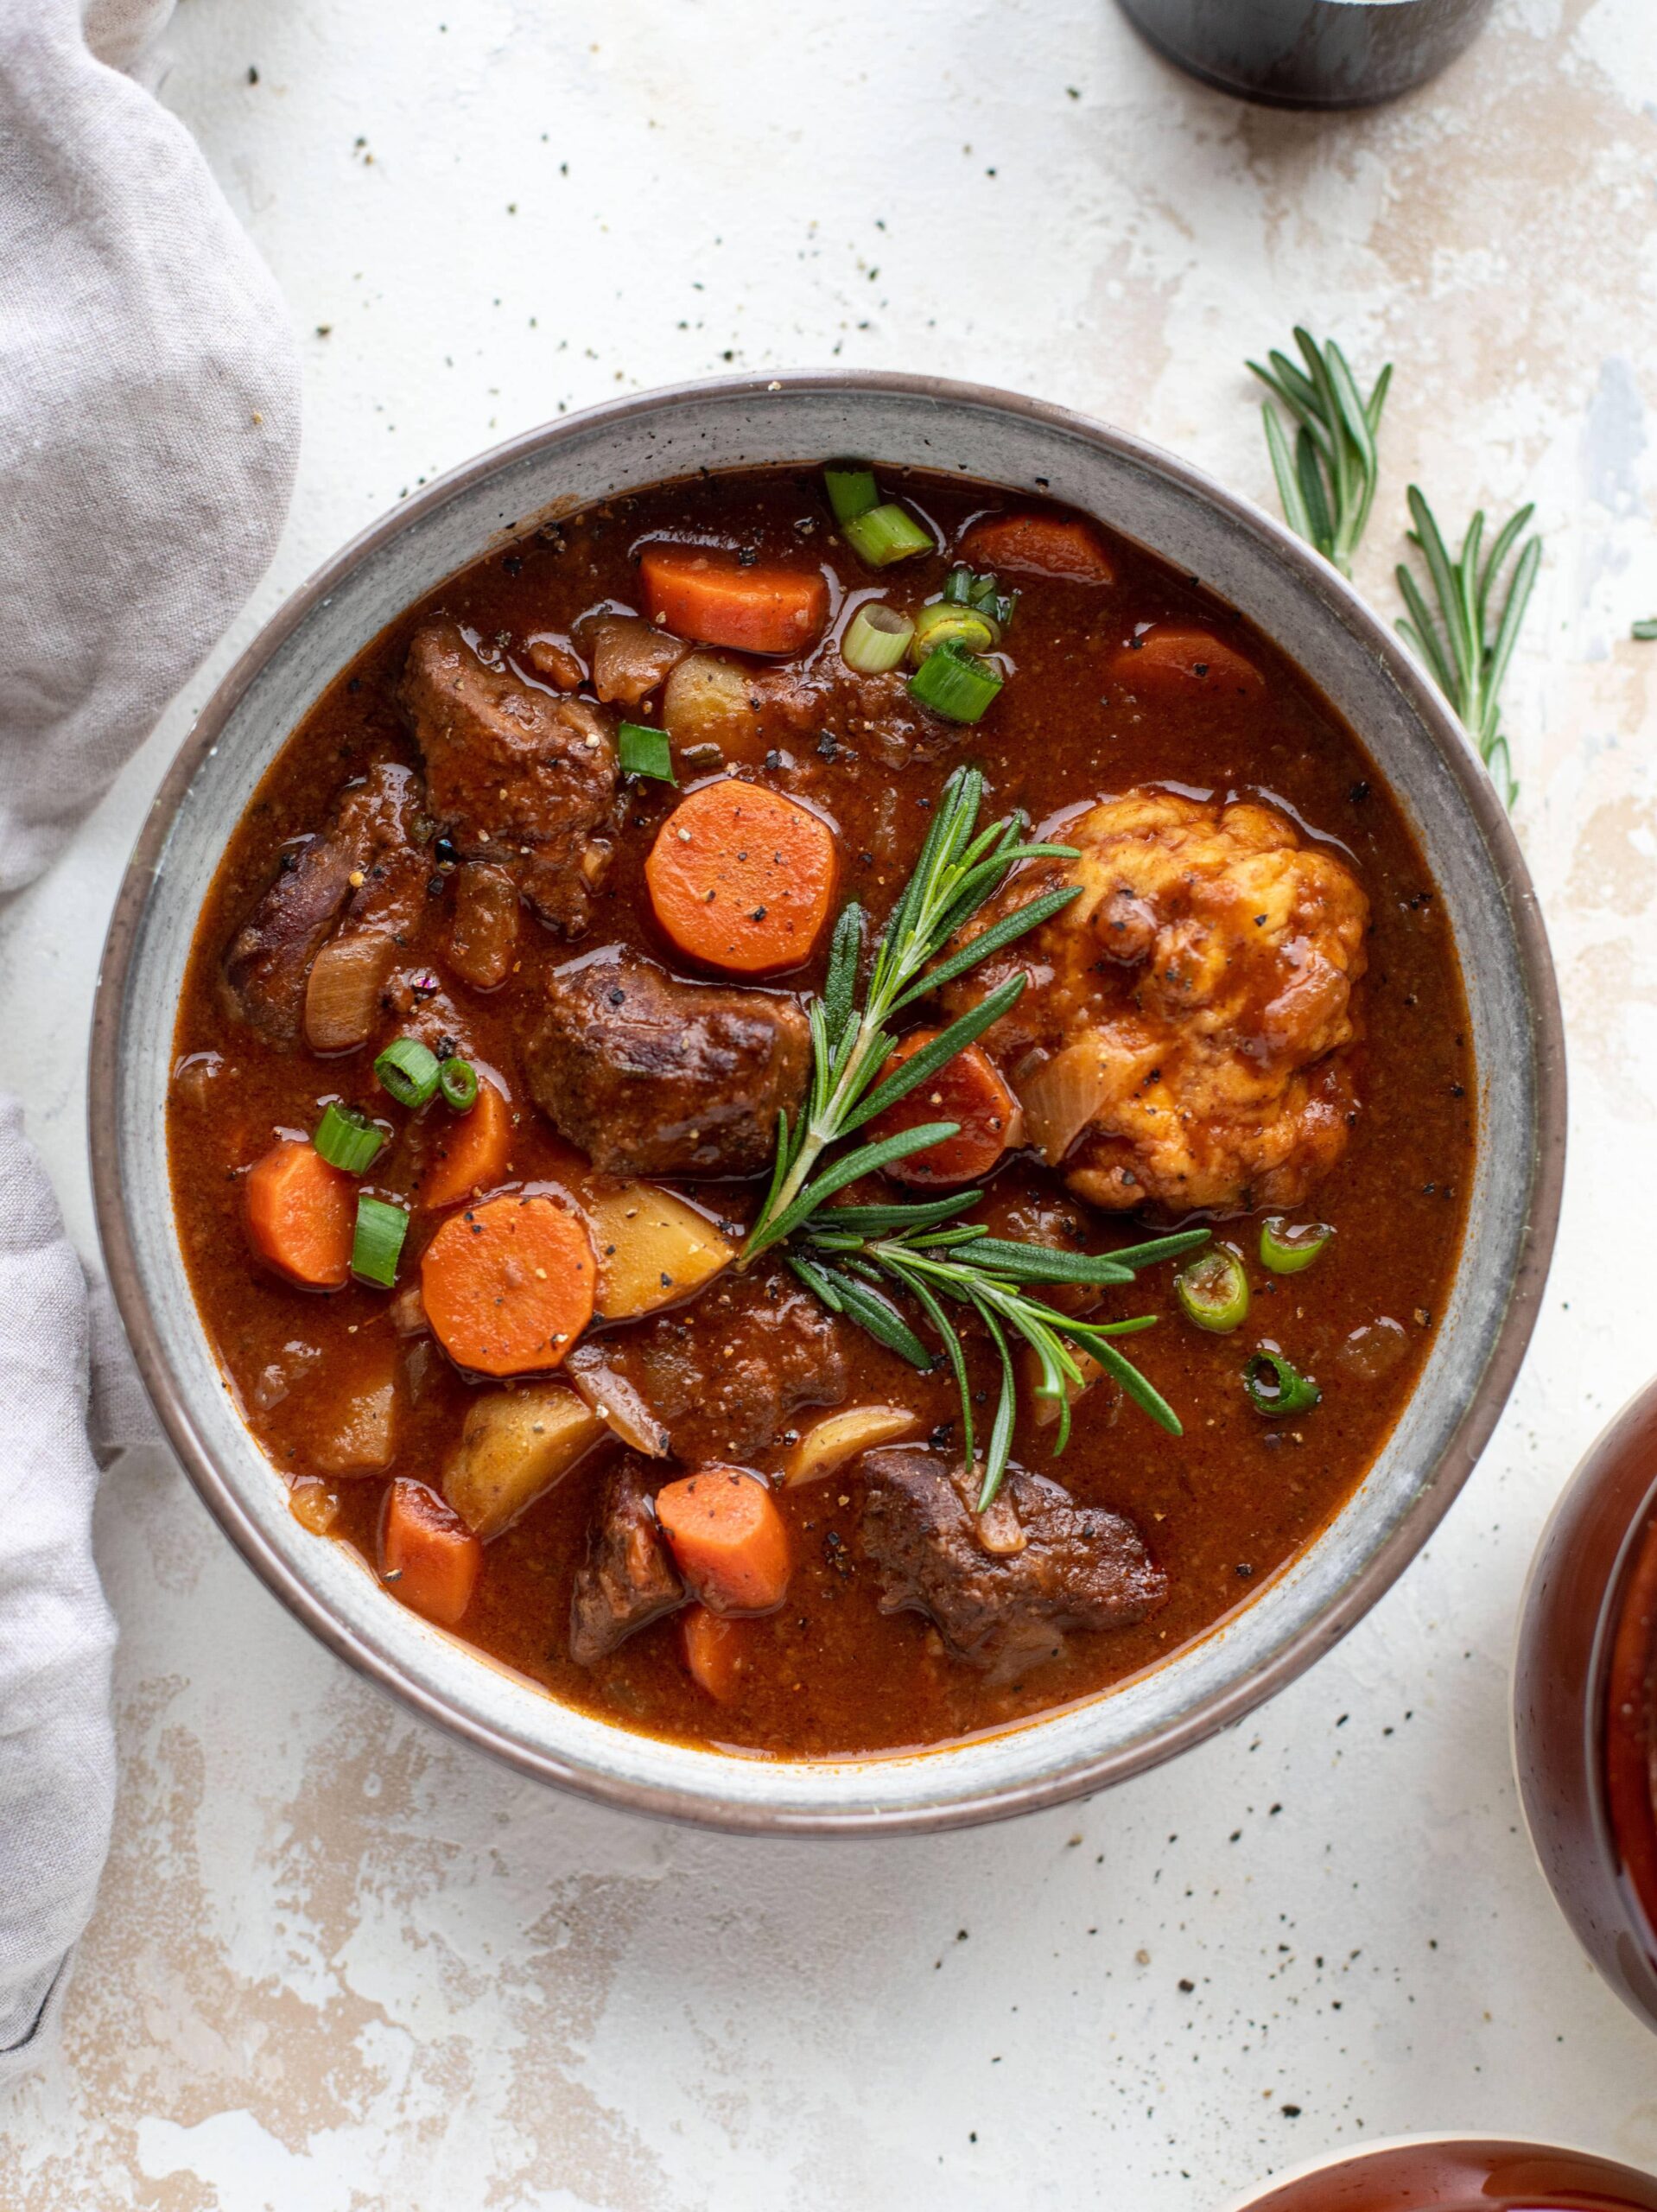 • The aroma of this stew will make your taste buds tingle with anticipation.